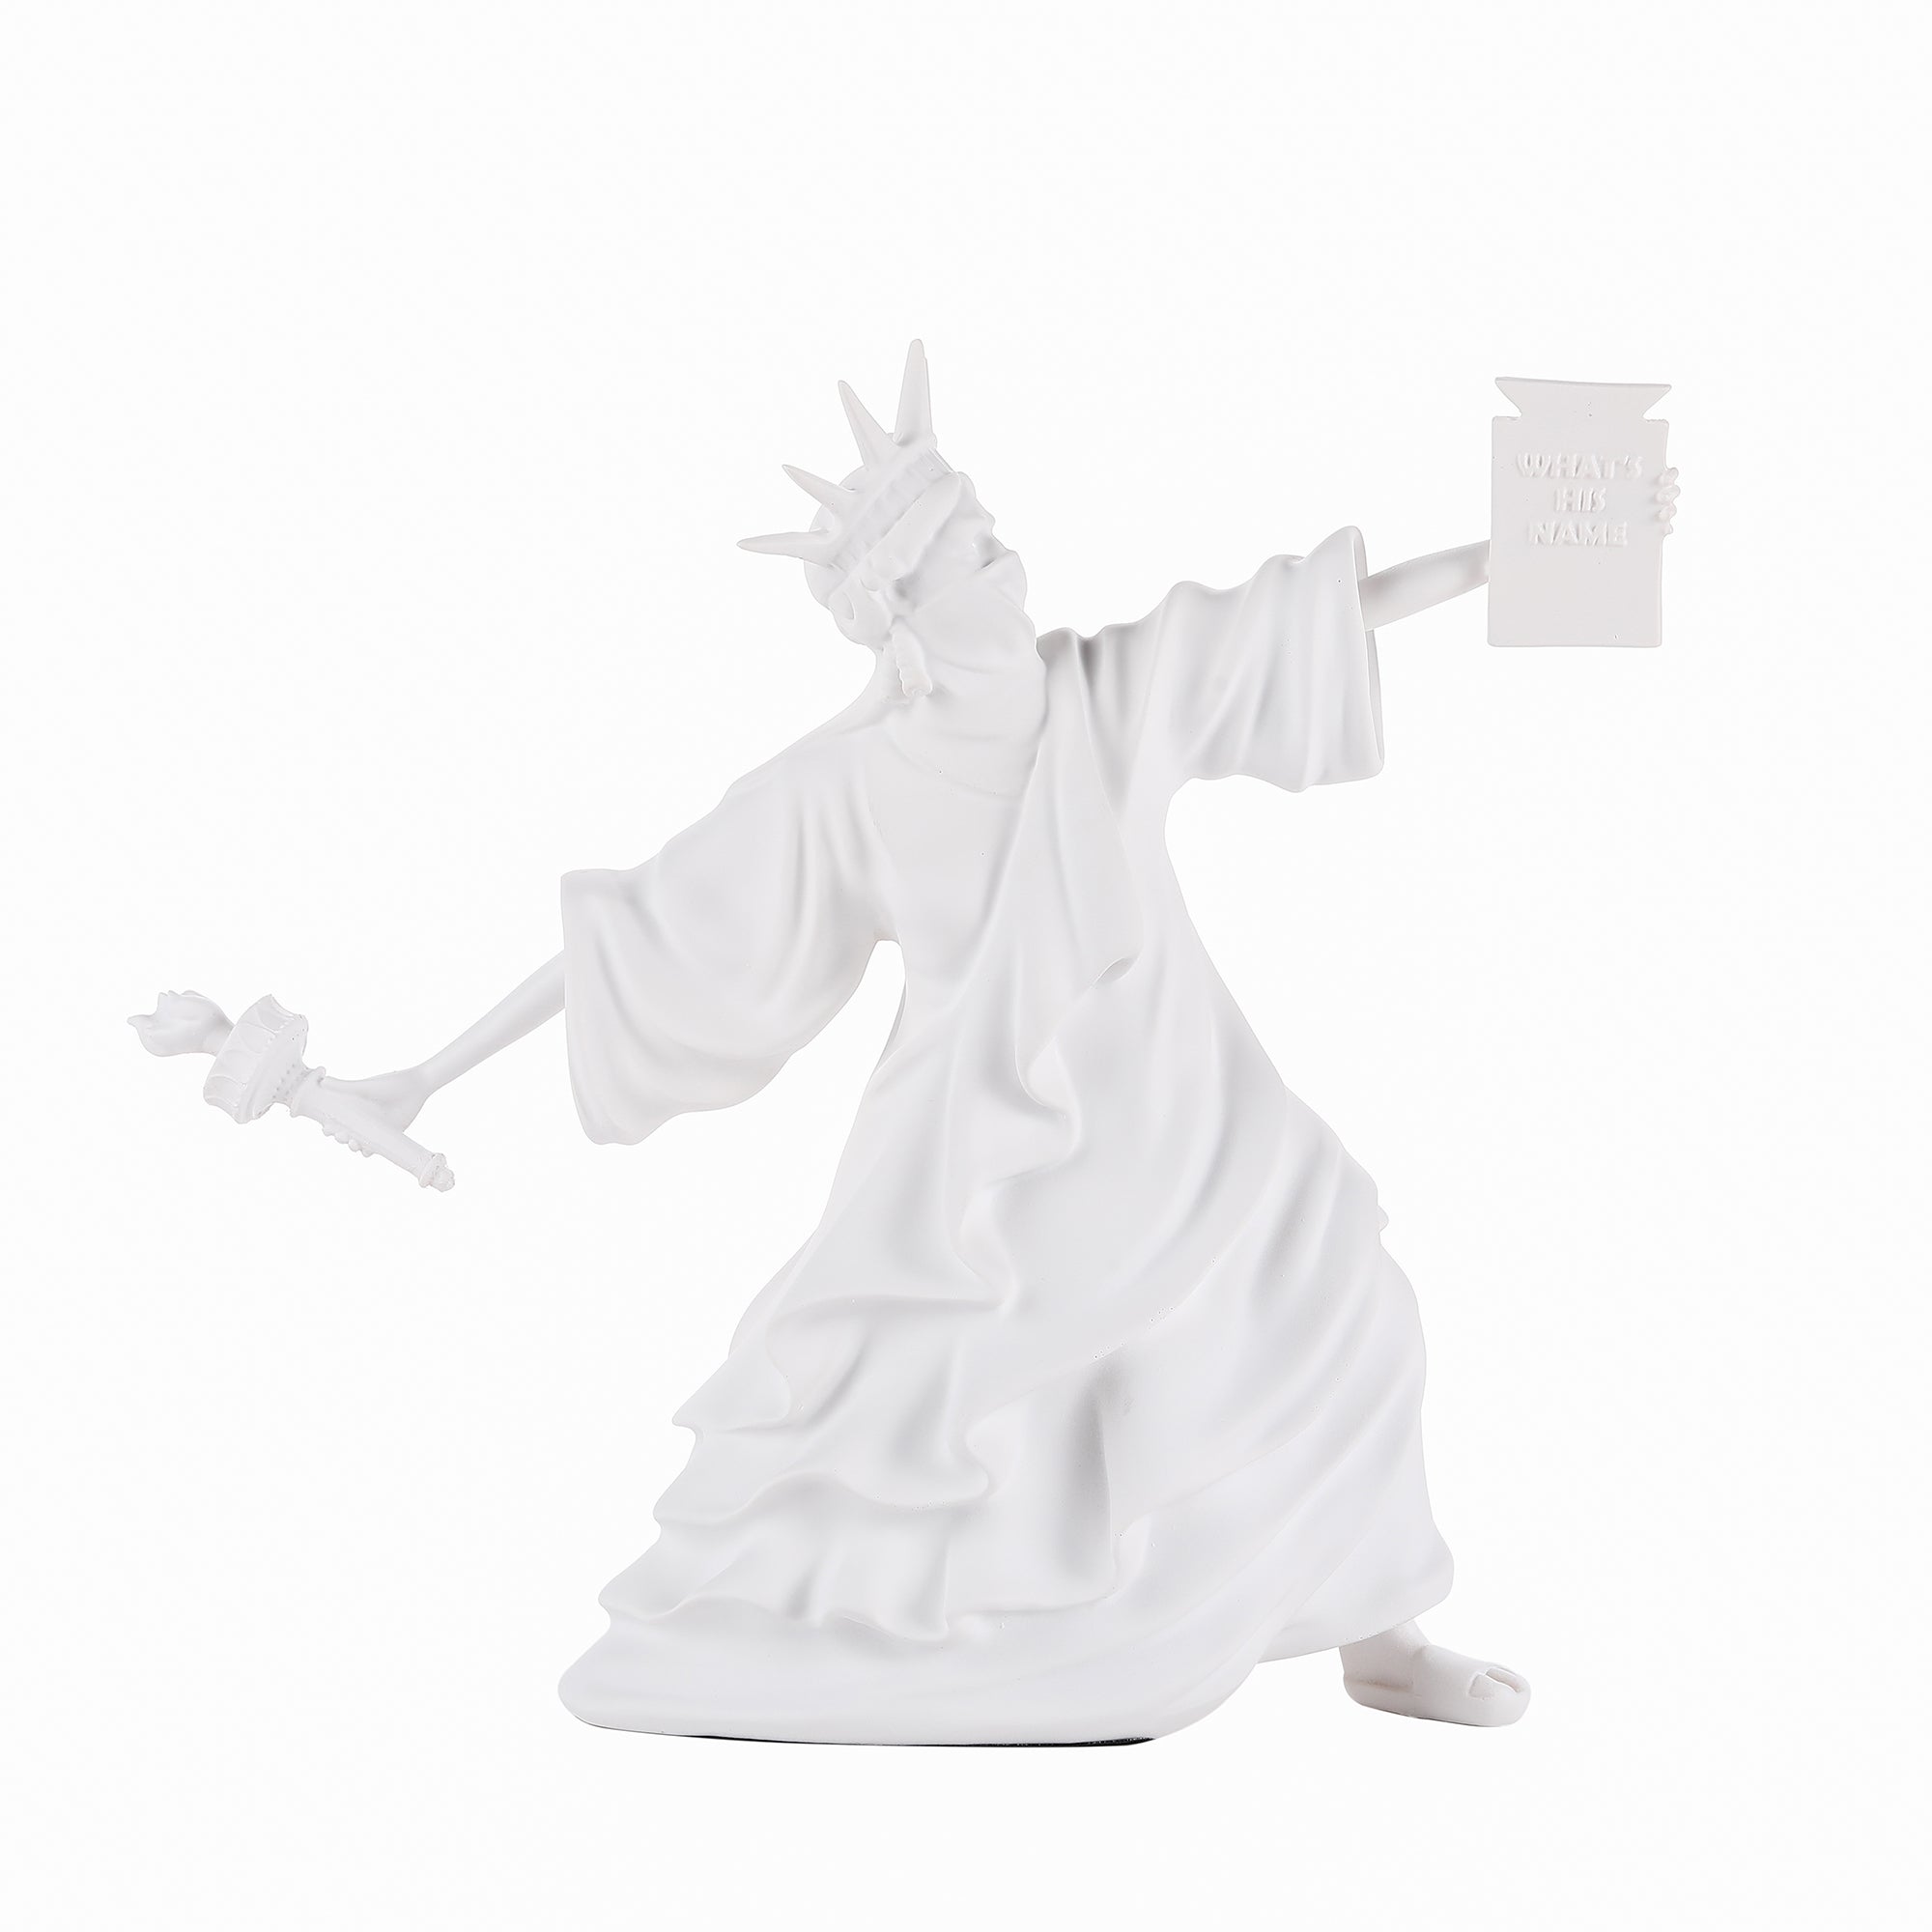 Liberty Statue Torch Thrower - Banksy - Magnito